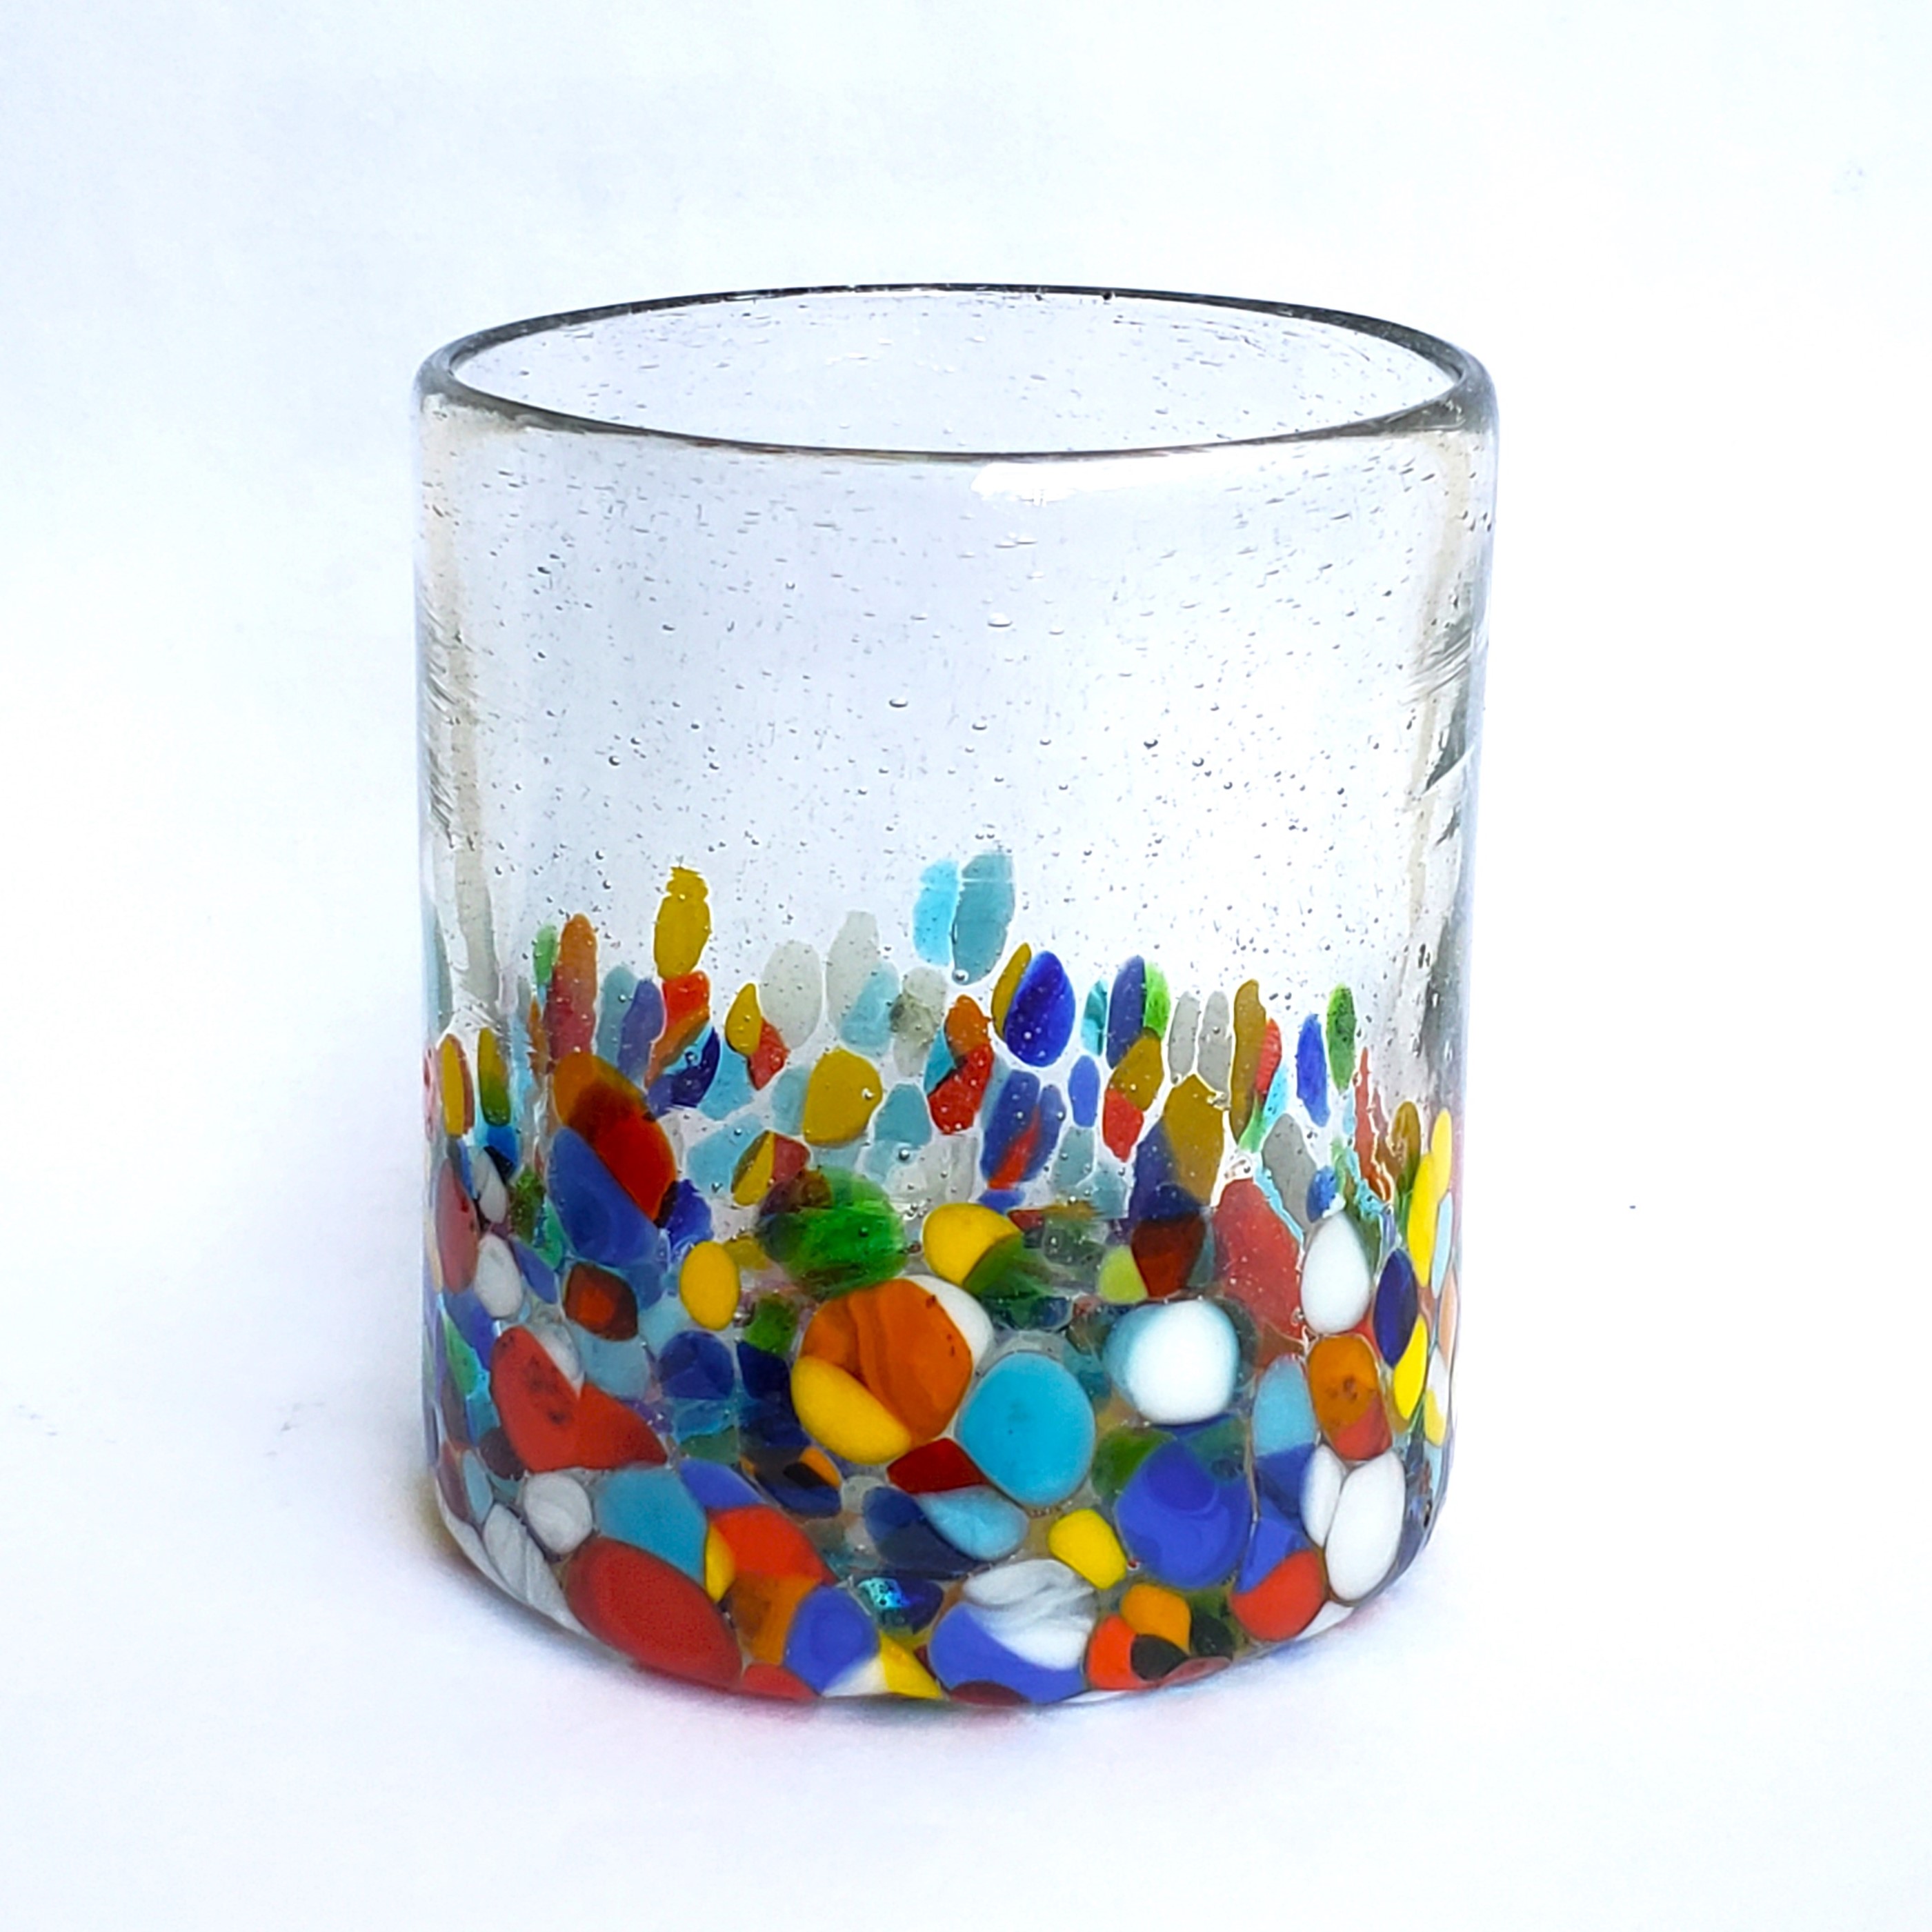 Wholesale Confetti Glassware / Clear & Confetti 9 oz Short Tumblers  / Our Clear & Confetti Glassware combines  the best of two worlds: clear, thick, sturdy handcrafted glass on top, meets the colorful, festive, confetti bottom! These glasses will sure be a standout in any table setting or as a fabulous gift for your loved ones. Crafted one by one by skilled artisans in Tonala, Mexico, each glass is different from the next making them unique works of art. You'll be amazed at how they make having a simple glass of water a happier experience. Made from eco-friendly recycled glass.